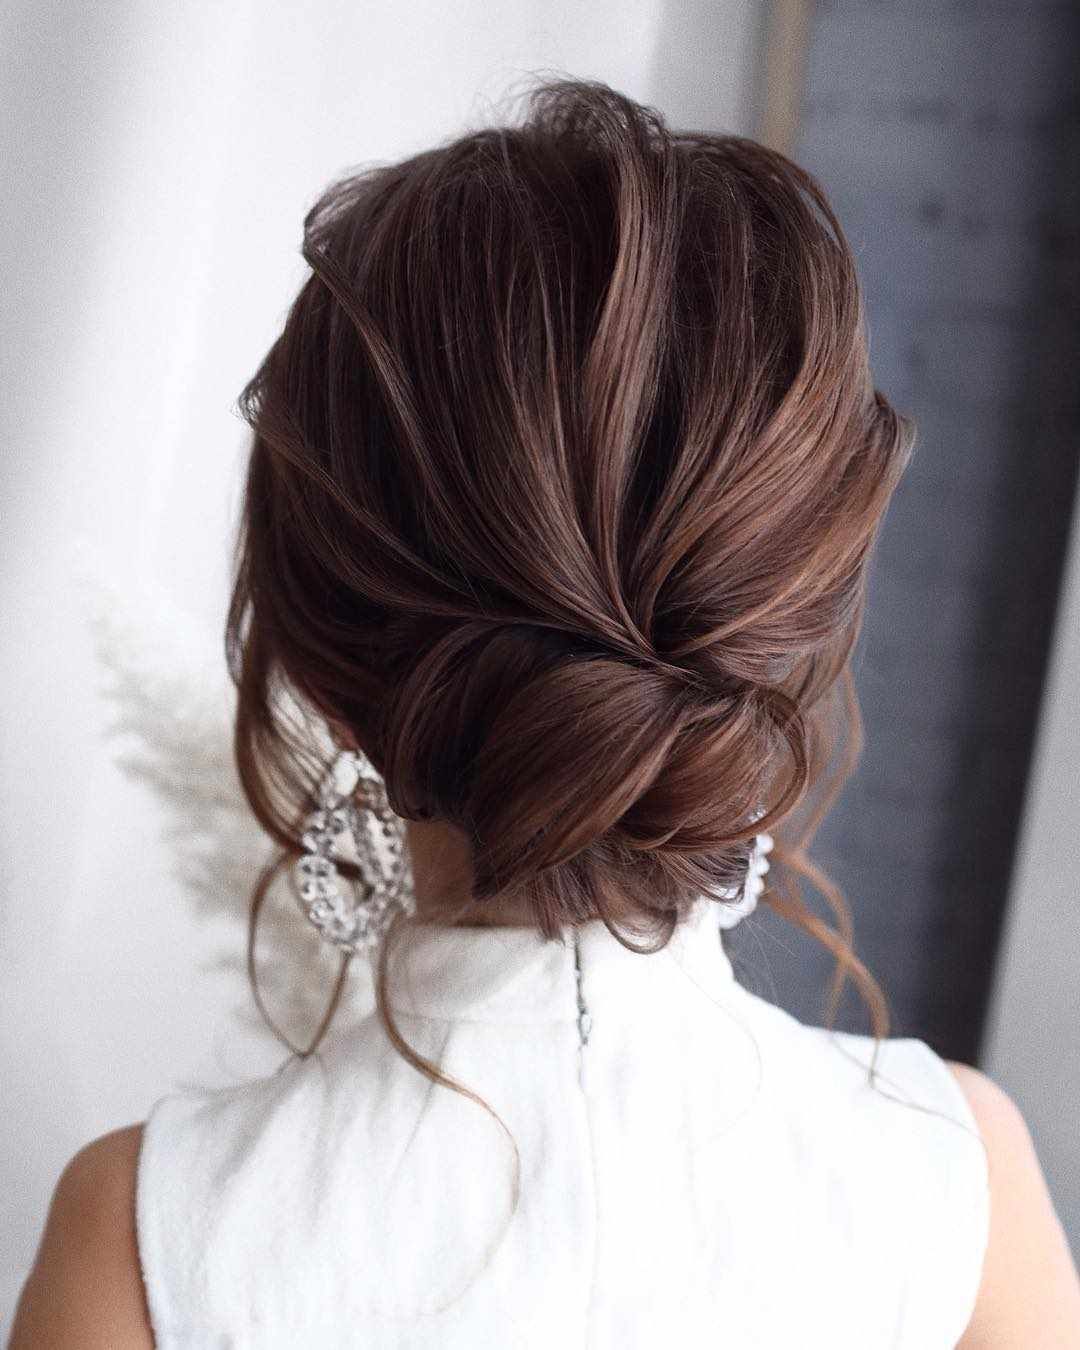 Prom Hairstyles For Long Hair -   15 hair Updos long
 ideas